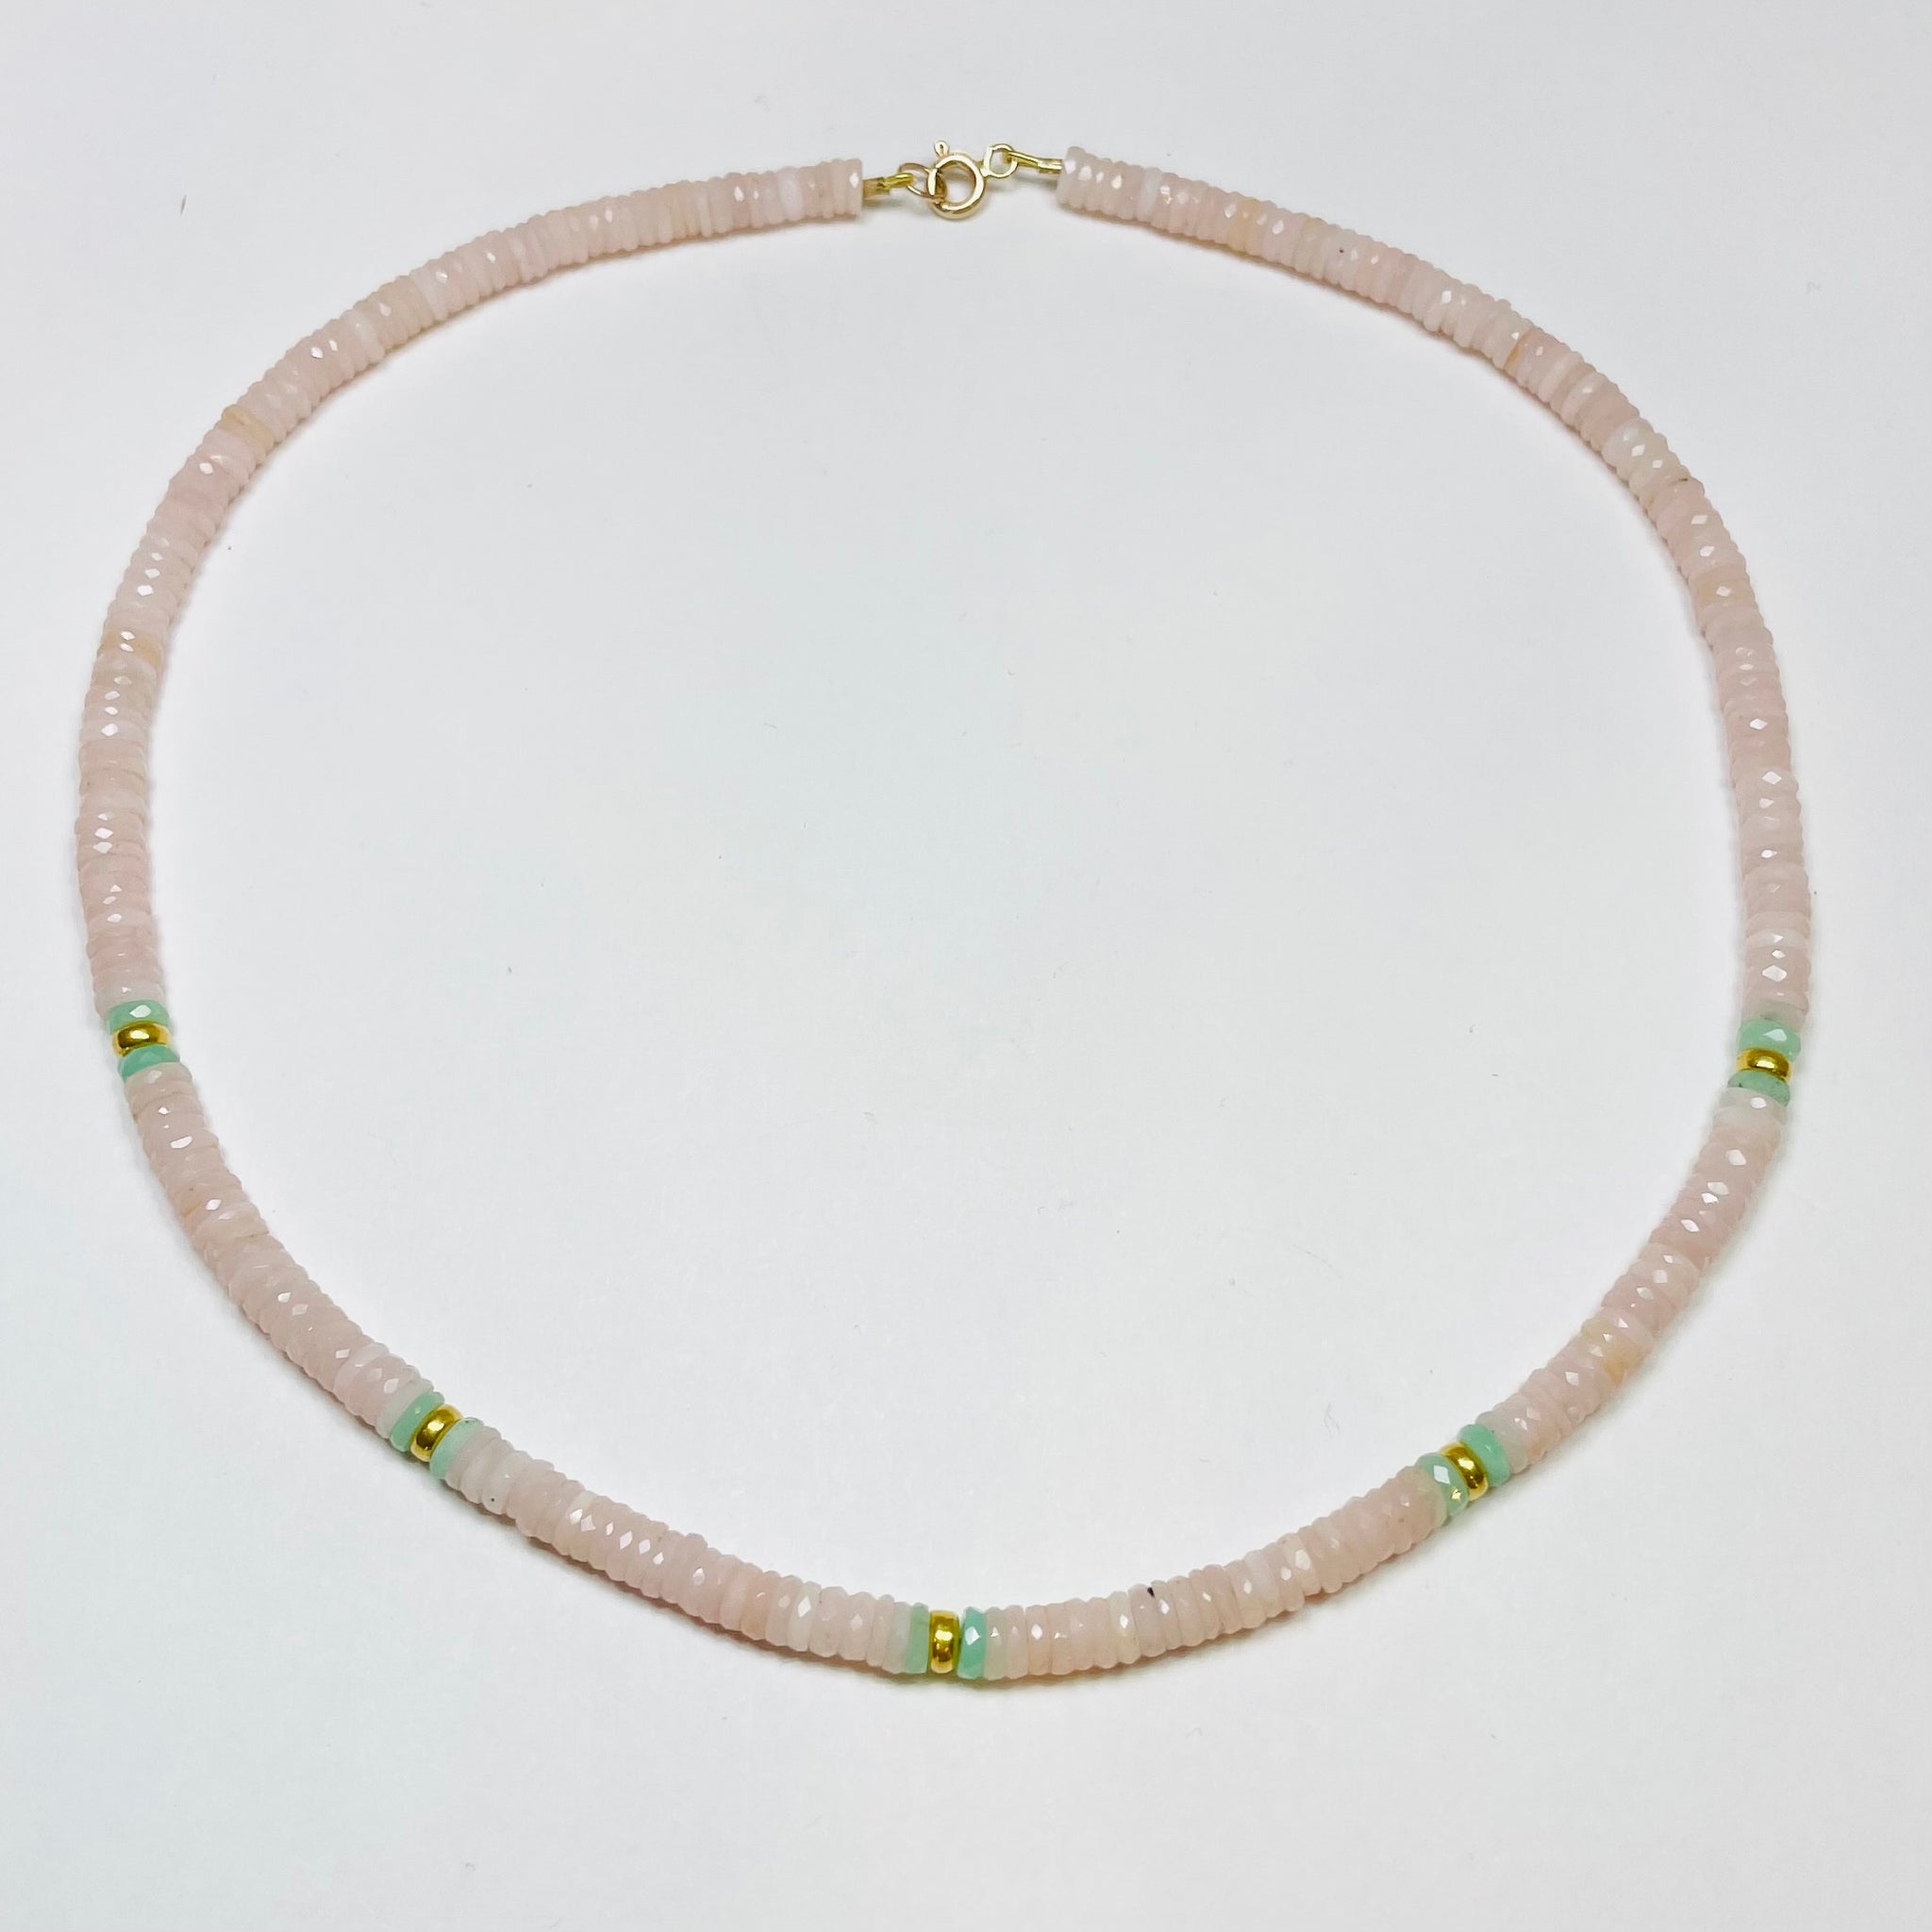 Pink opal heishi necklace with turquoise and gold beads